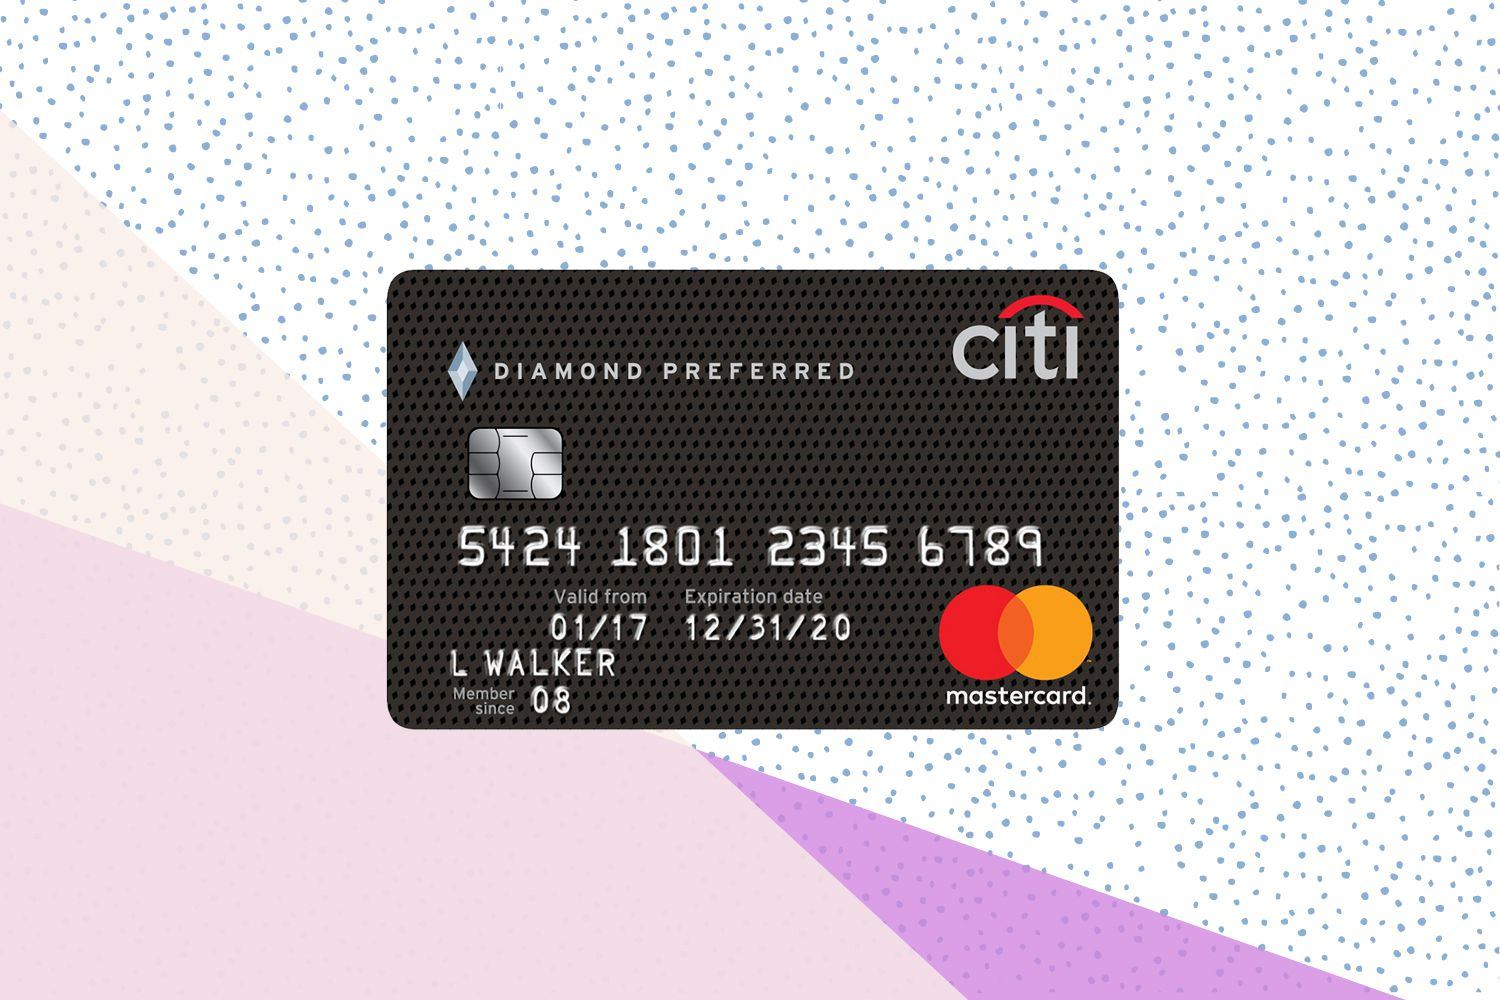 Citi Diamond Credit Card - See How to Apply